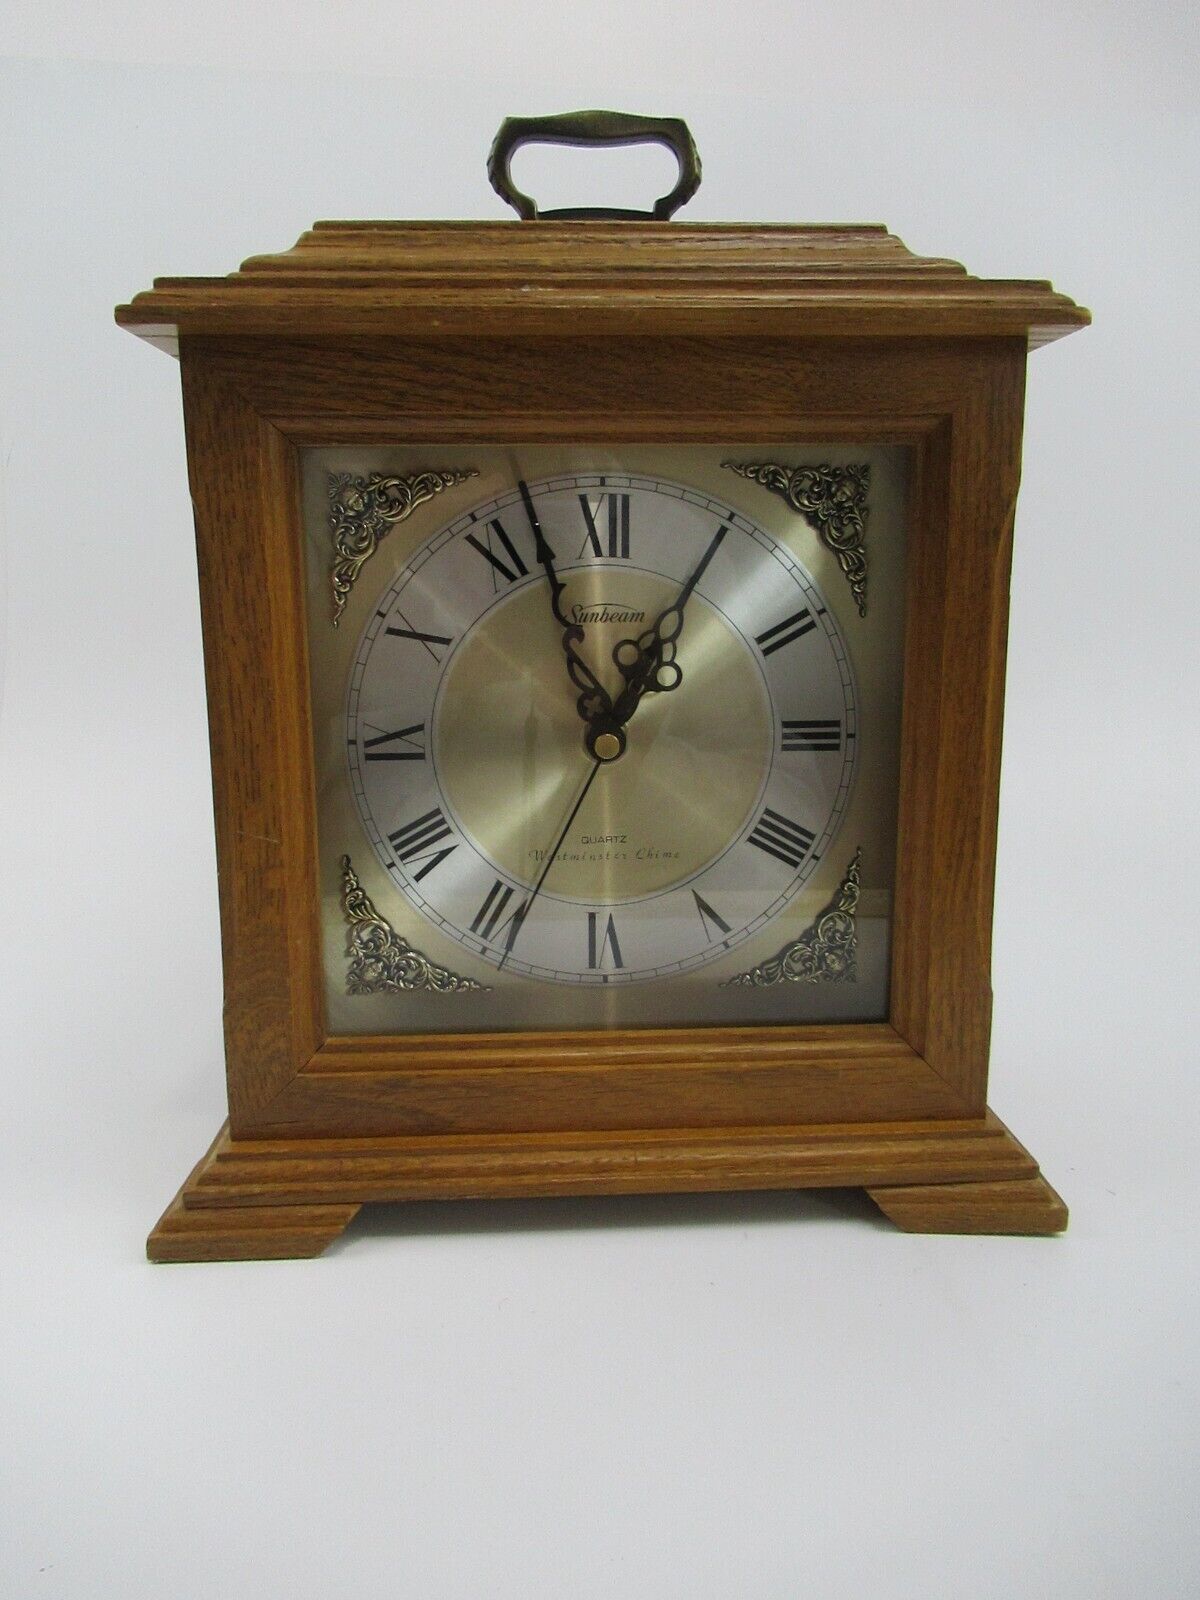 Sunbeam Westminster Mantel Clock Wood Oak Battery Operated Chime Tested/Working